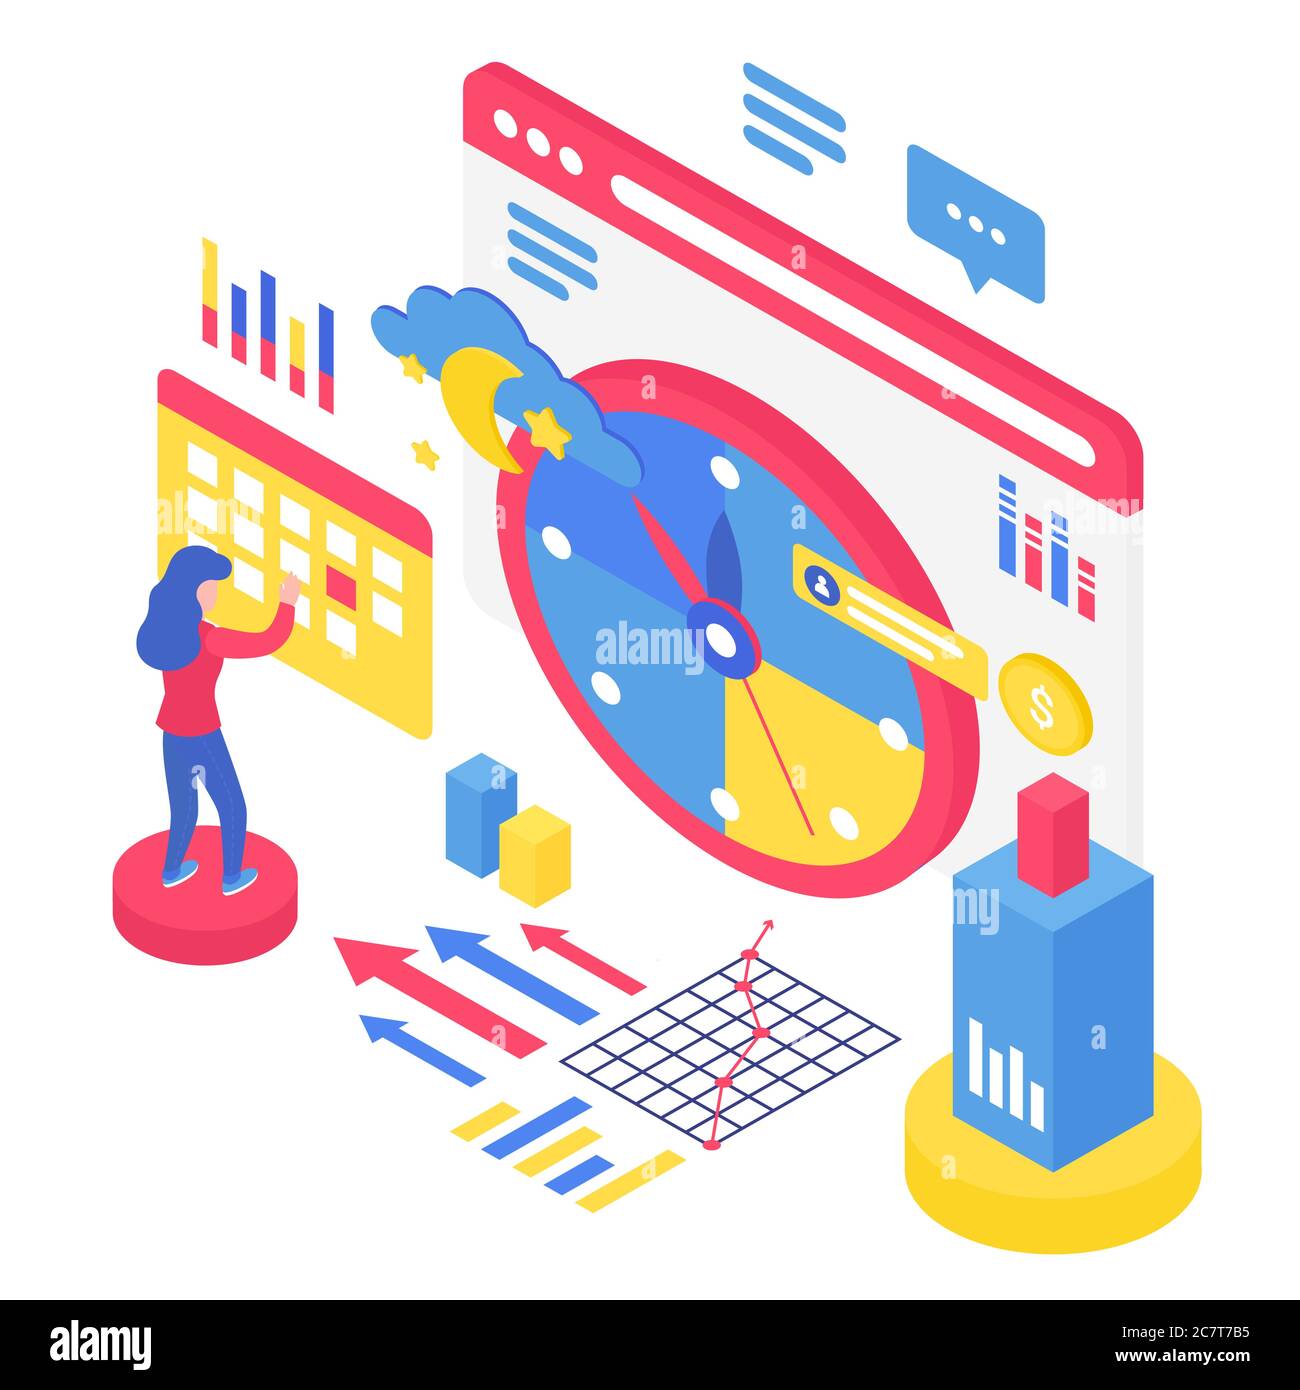 Time management isometric vector illustration. Monthly scheduling to meet project deadlines. Digital service to help organizing timetable. Online platform cartoon conceptual design element Stock Vector